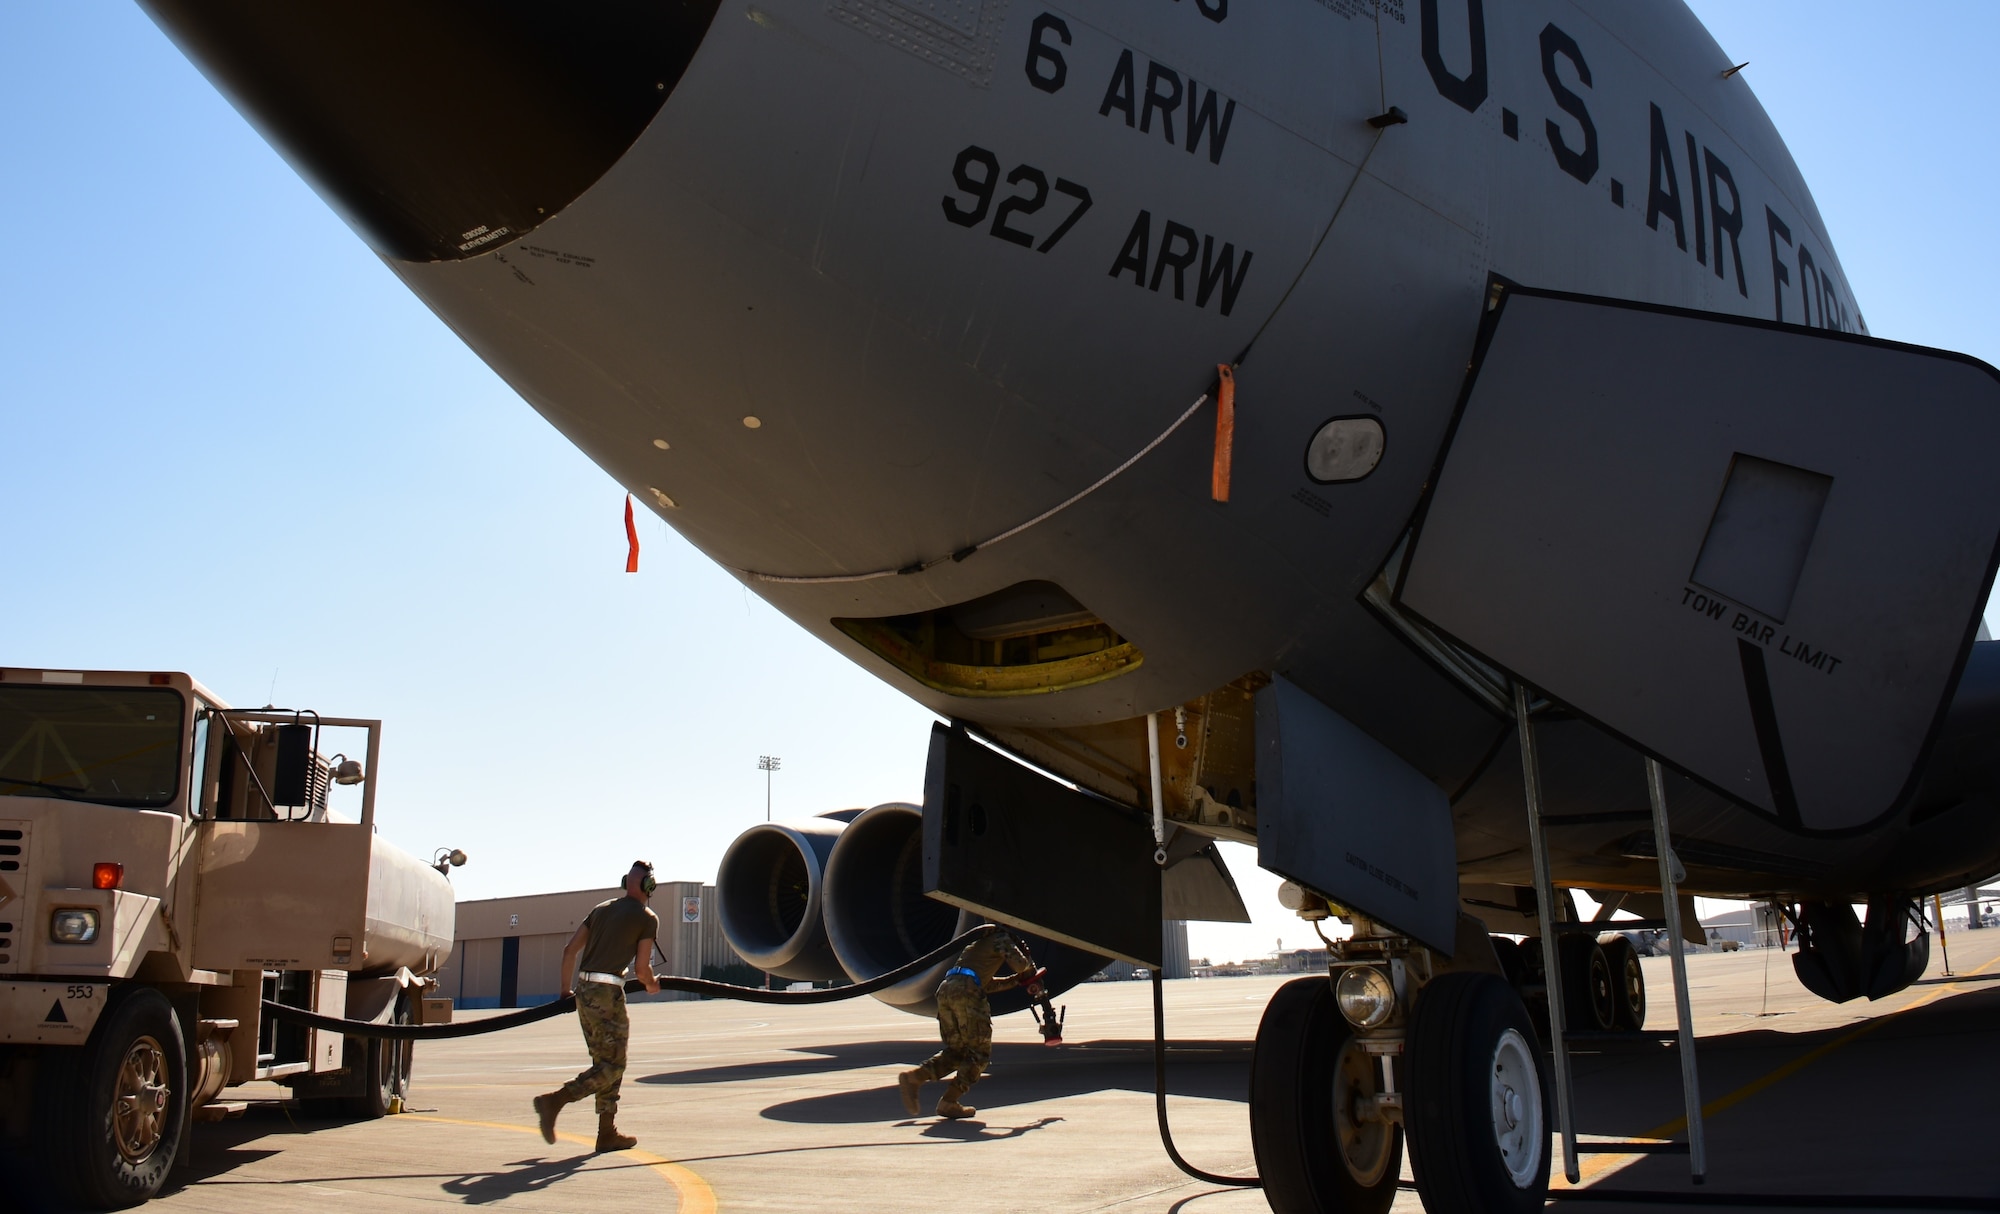 Two Airmen run a refueling hose from a truck to a KC-135 Stratotanker to refuel in on the flightline.